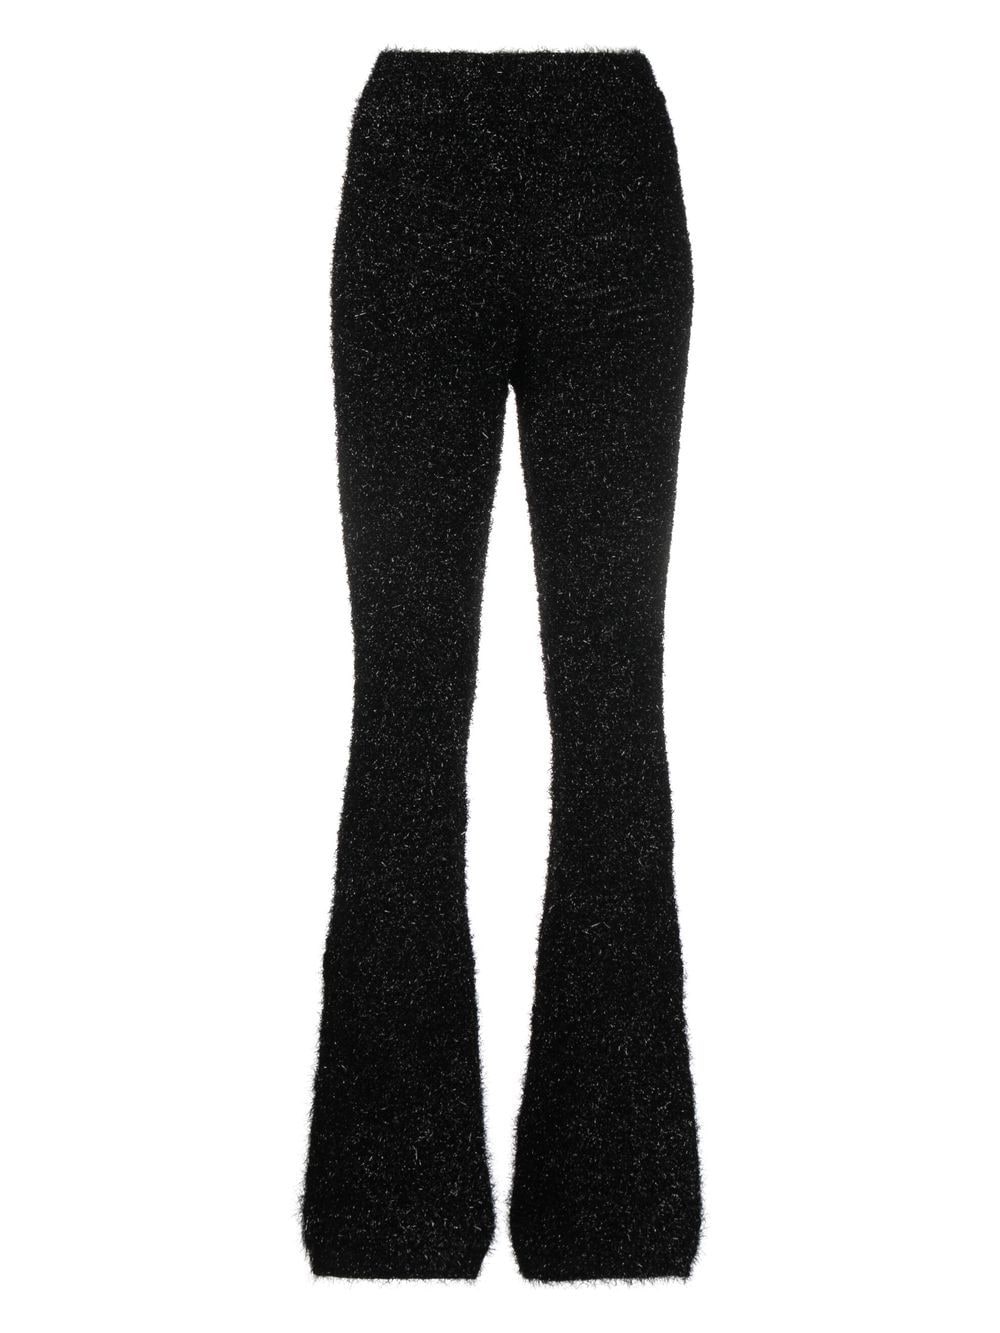 MARCO RAMBALDI-MOUTH JACQUARD KNITTED TROUSERS-KN111PNT 10